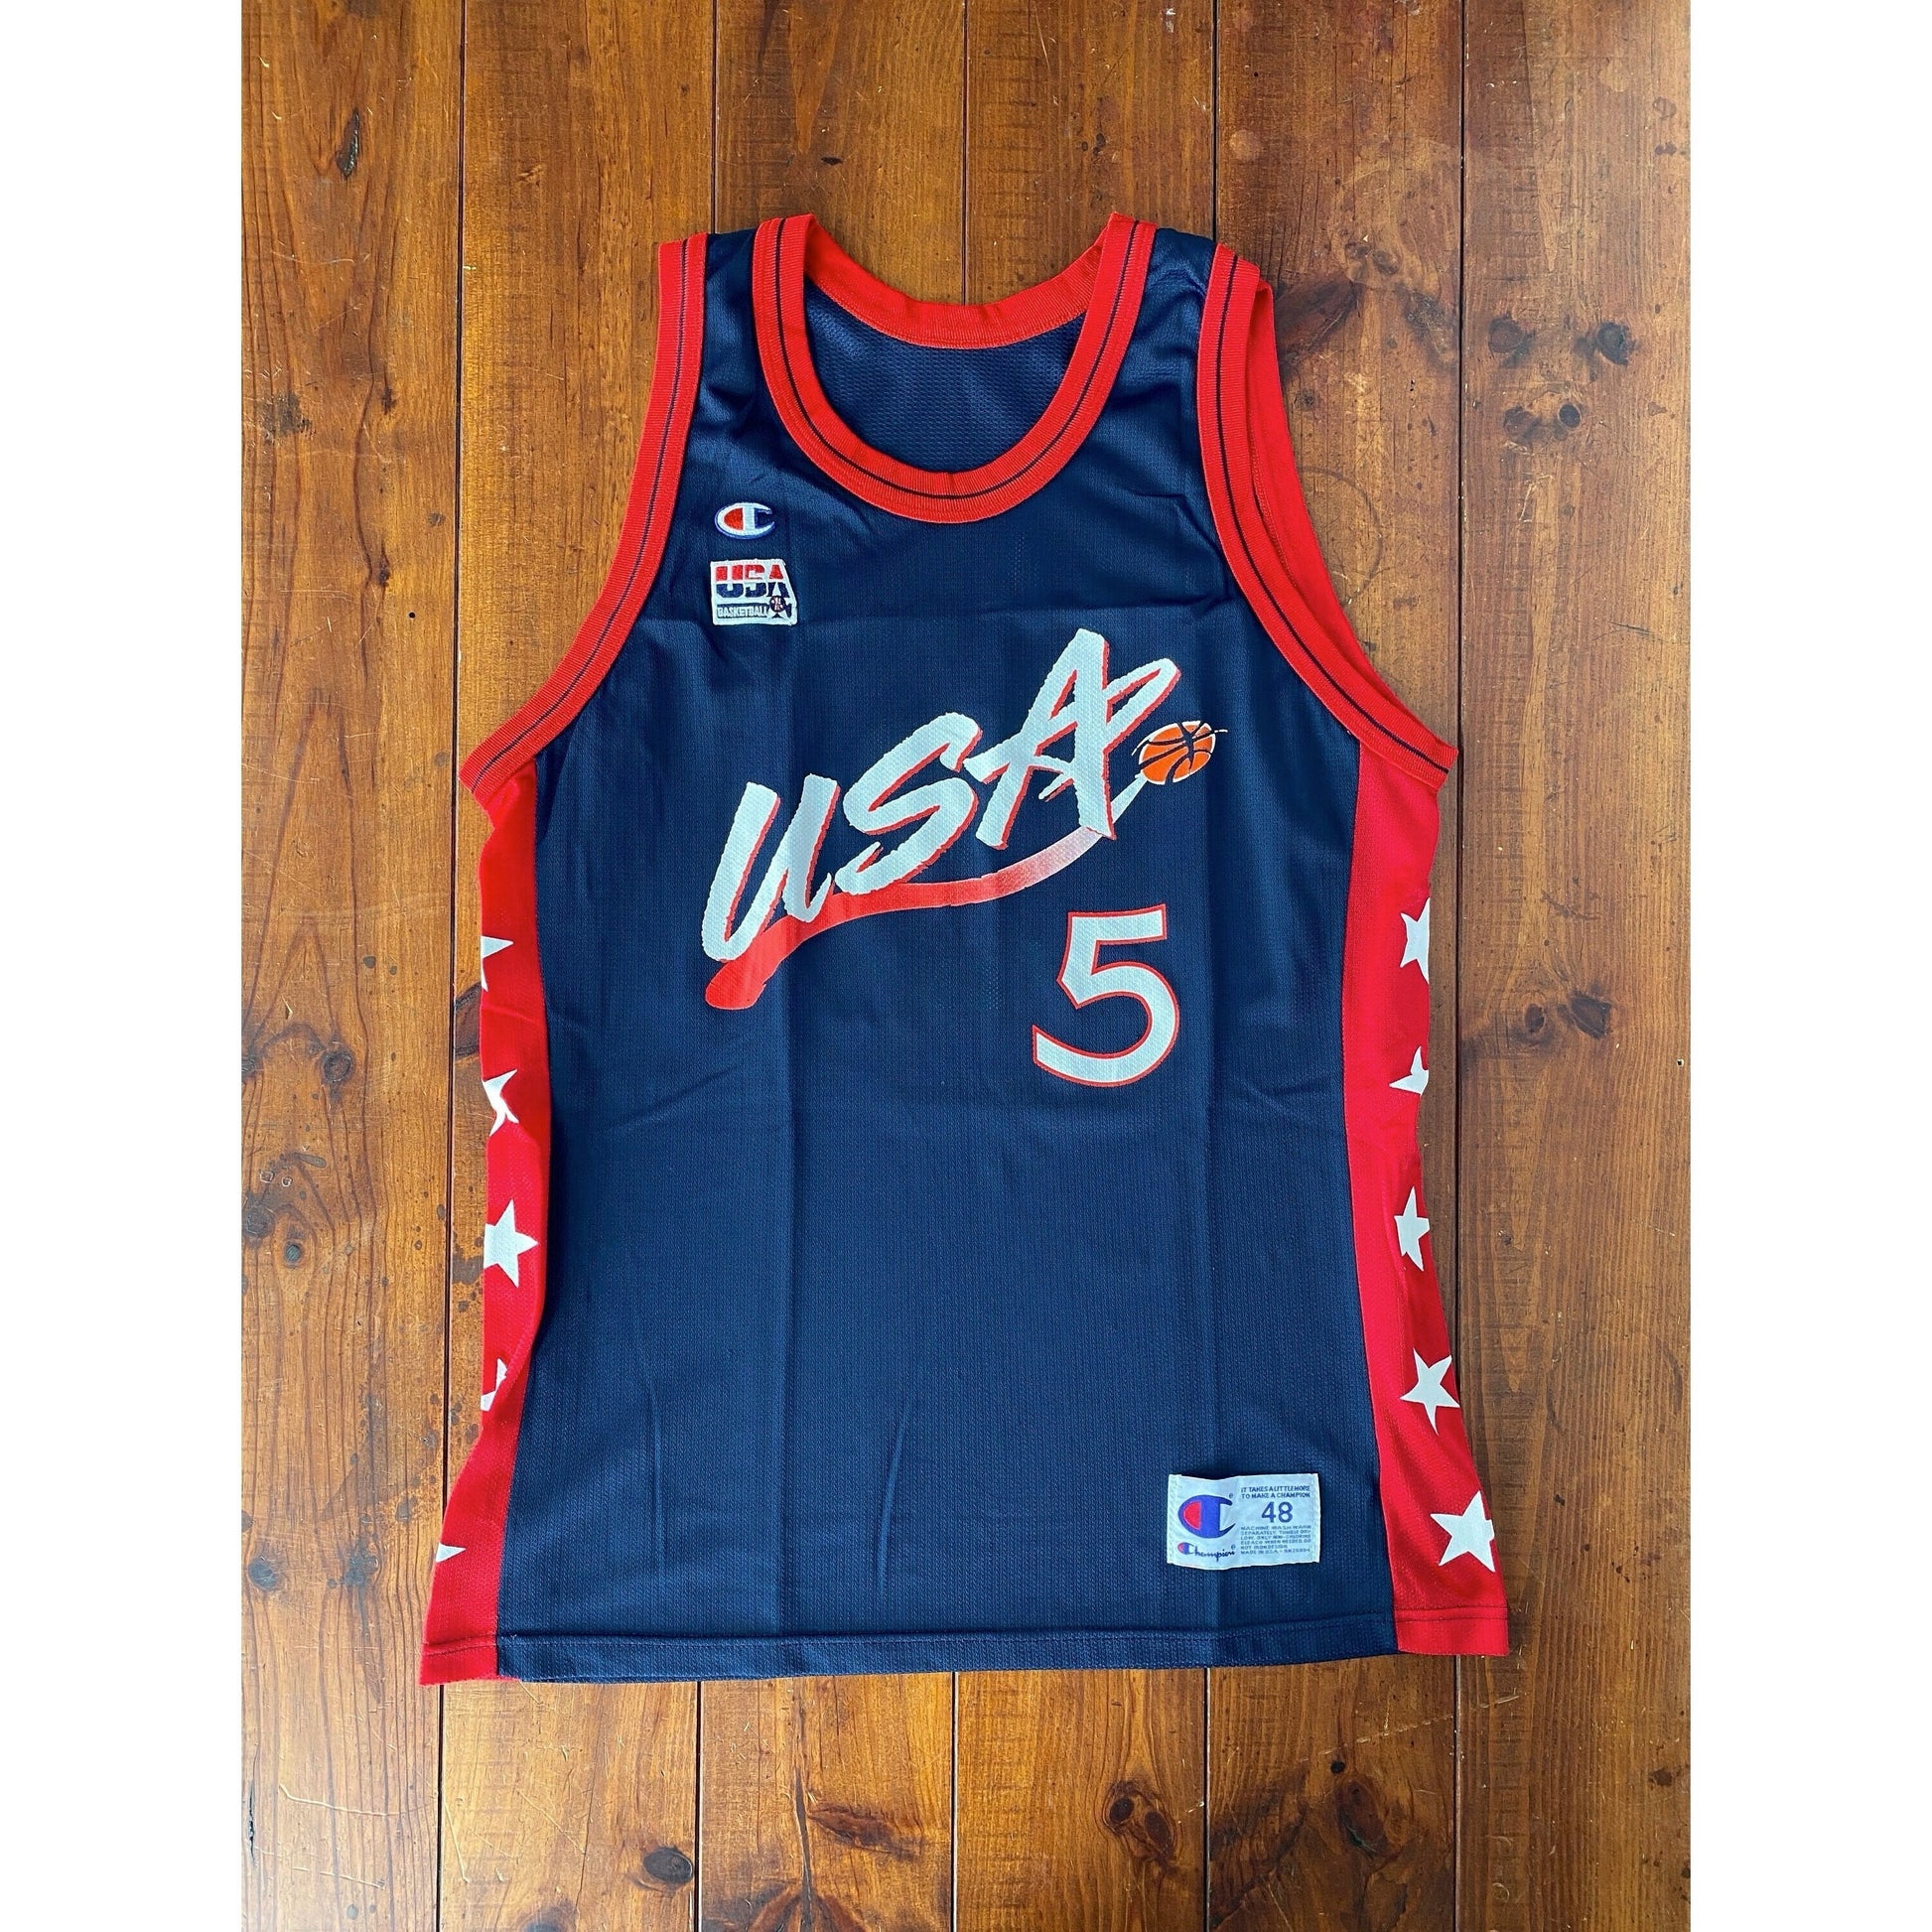 Grant Hill #5 Vintage Jersey, Dream Team Olympic Champion NBA Jersey, Size 48, Made in USA, Authentic NBA Jersey, Sports Memorabilia, Basketball Apparel